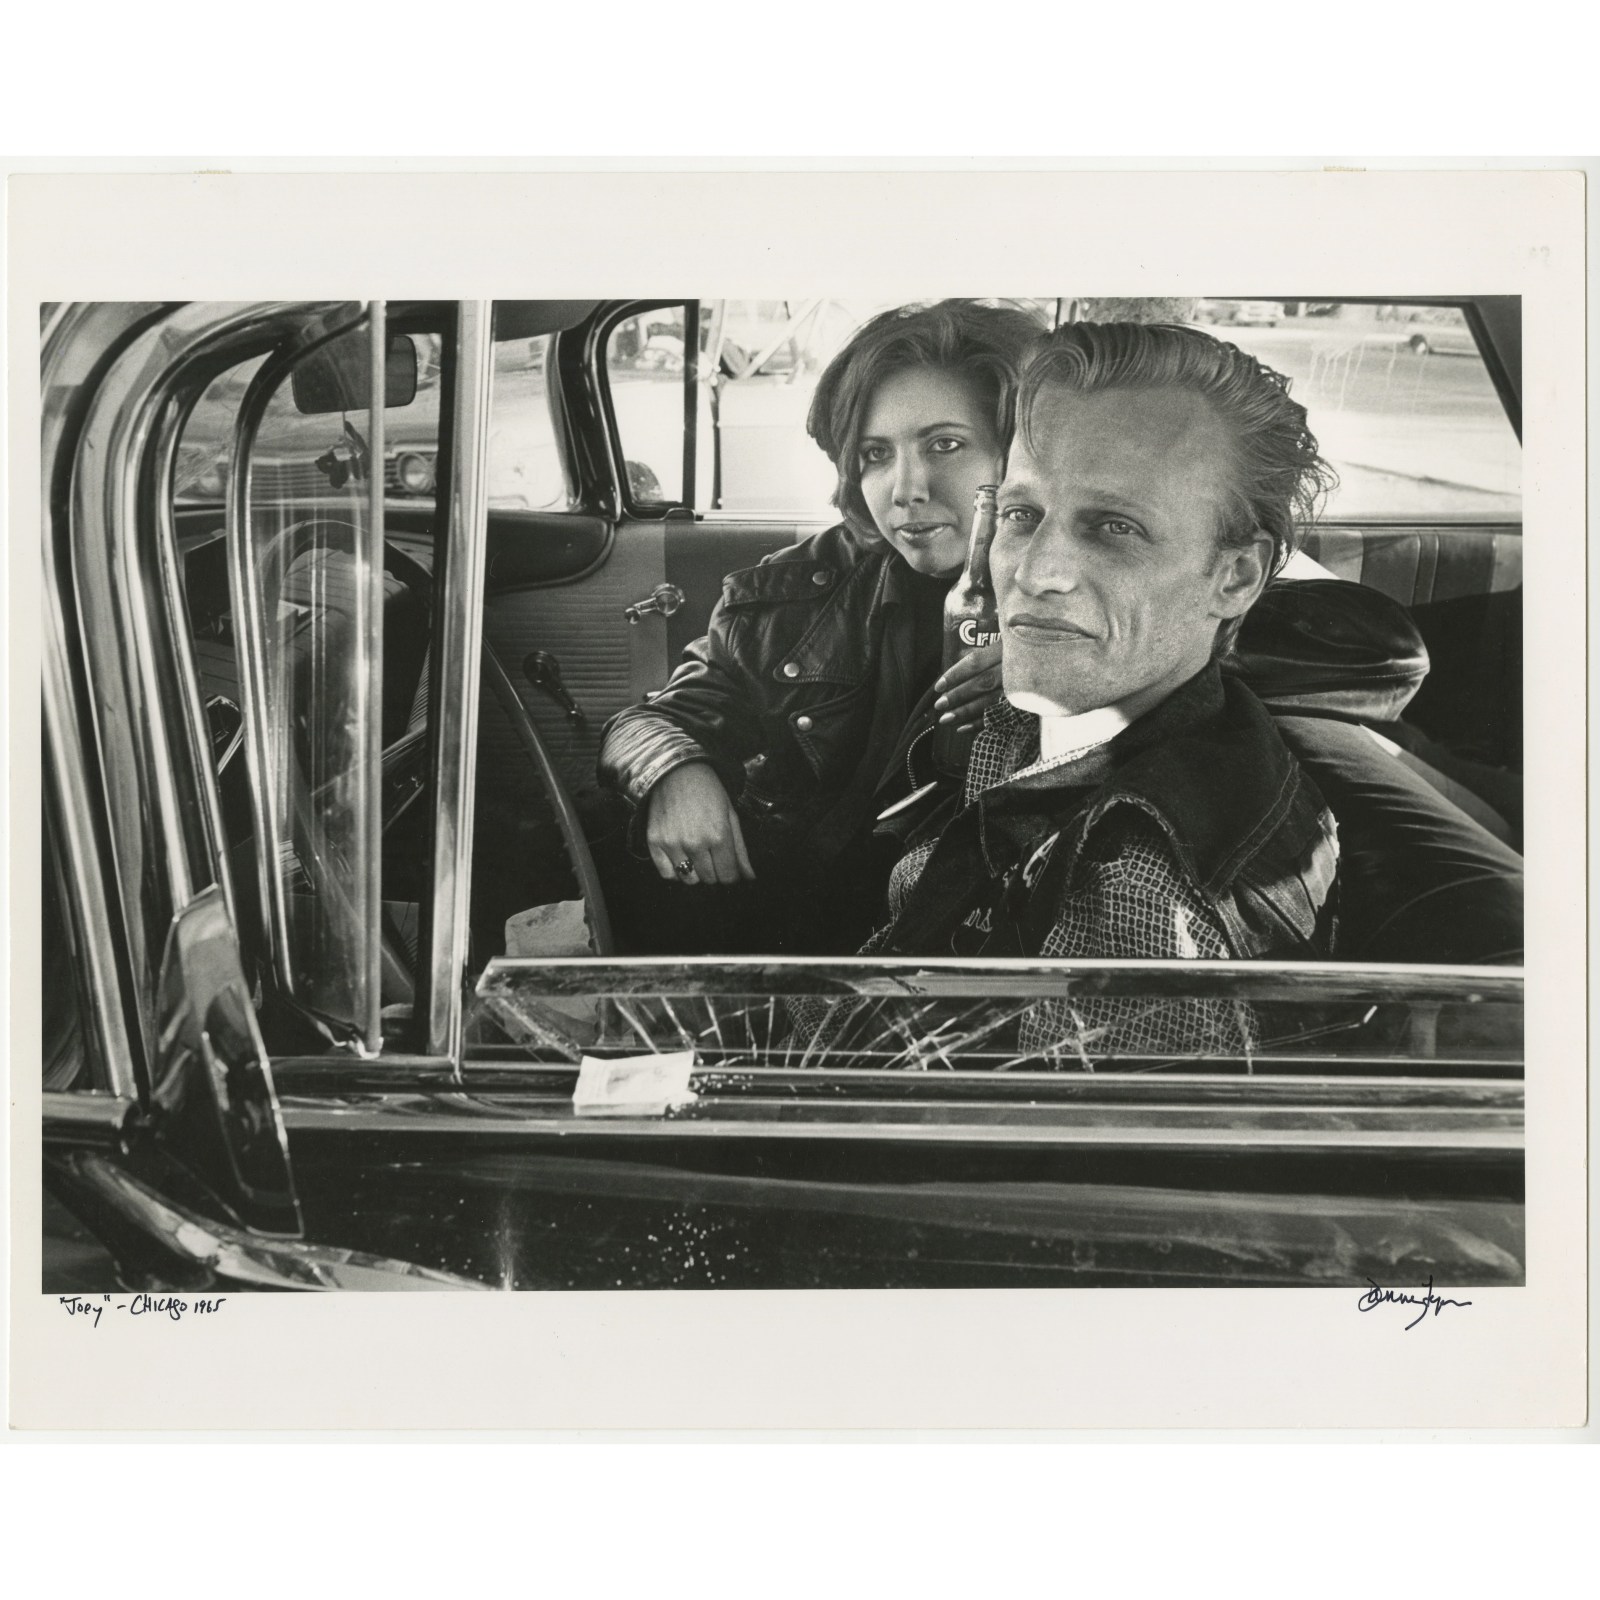 A couple sit in an old car while wearing leather jackets and looking towards the photographer in this black and white photograph.